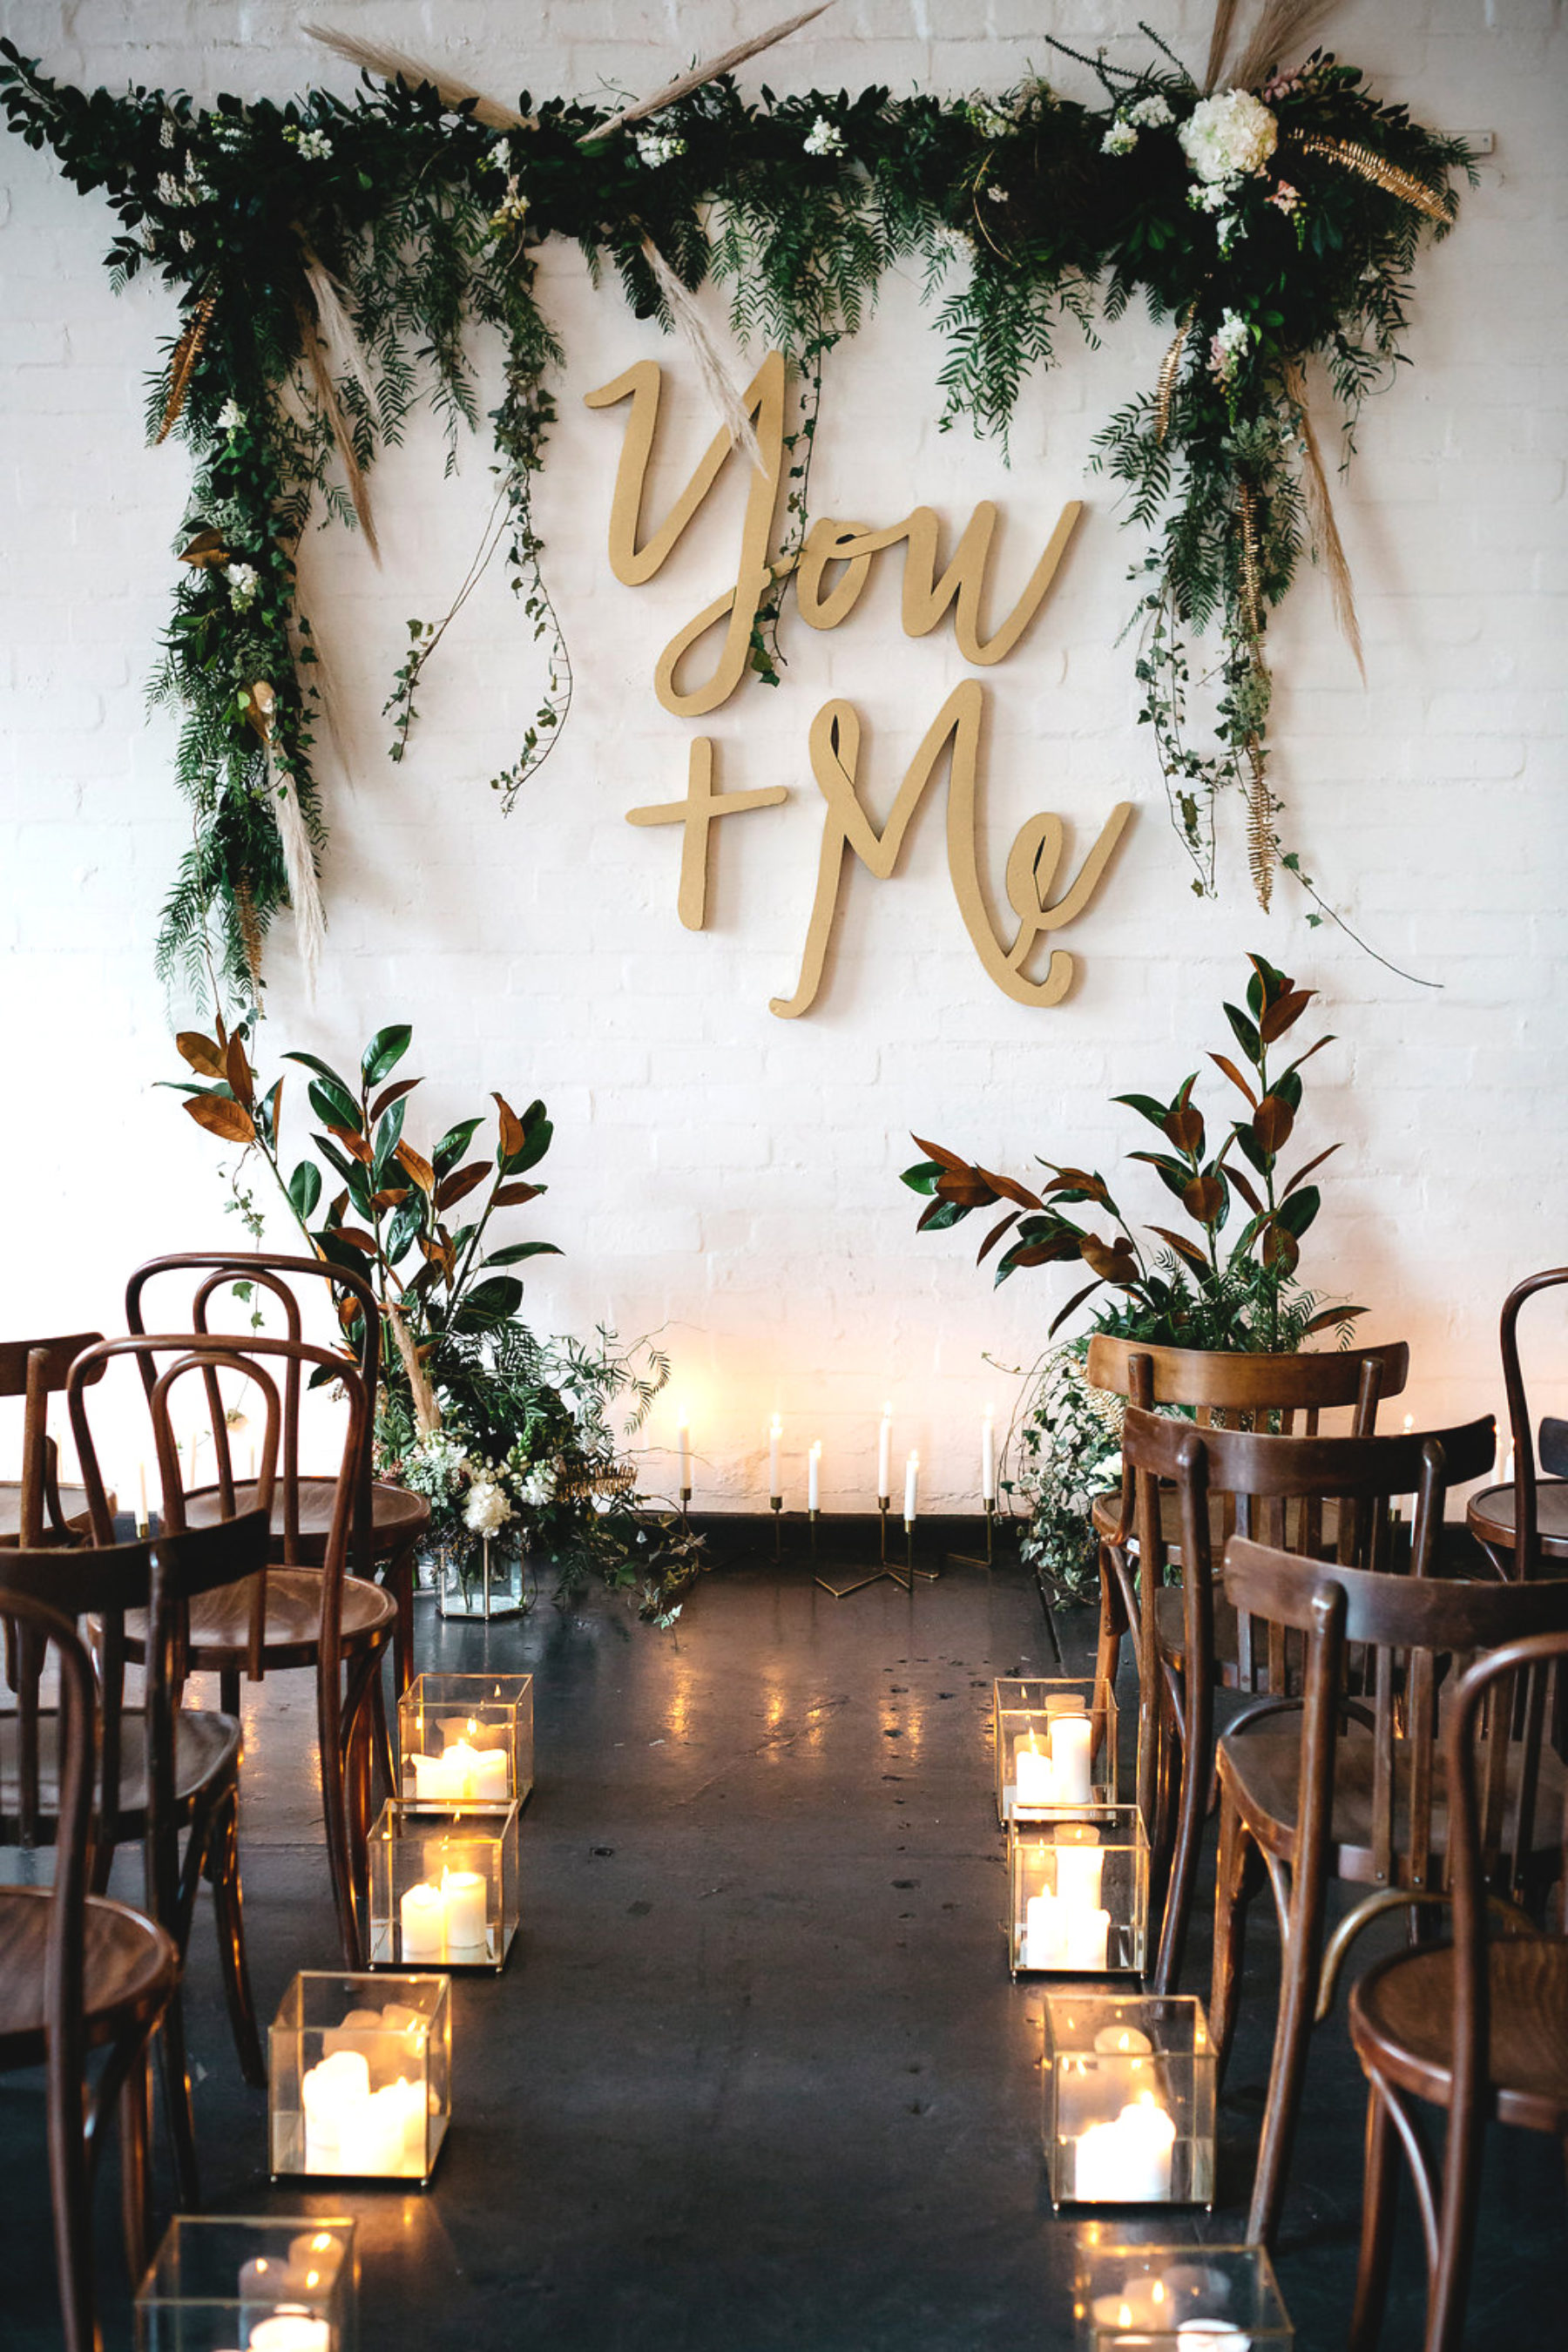 Industrial Indoor Wedding Ceremony Using Geometric Candle Holder to Decorate the Aisle. // 15 Stunning Ways to Decorate with Candles // https://mysweetengagement.com